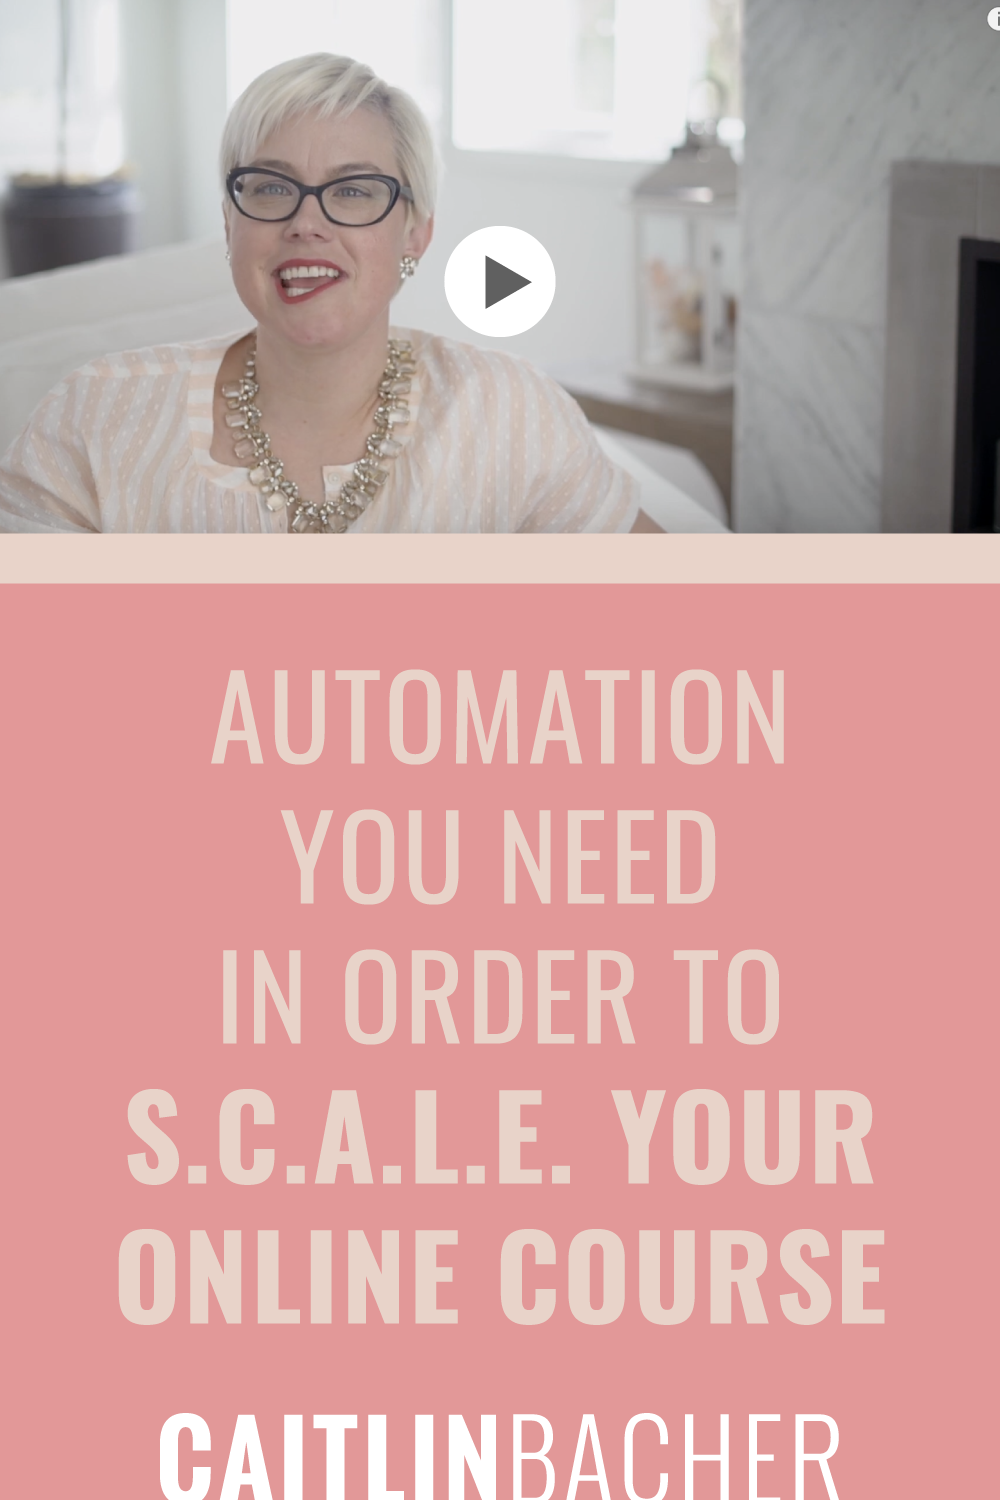 Automation You Need In Order To S.C.A.L.E. Your Online Course | Scale With Success | Course Creator | Business Tips | caitlinbacher.com